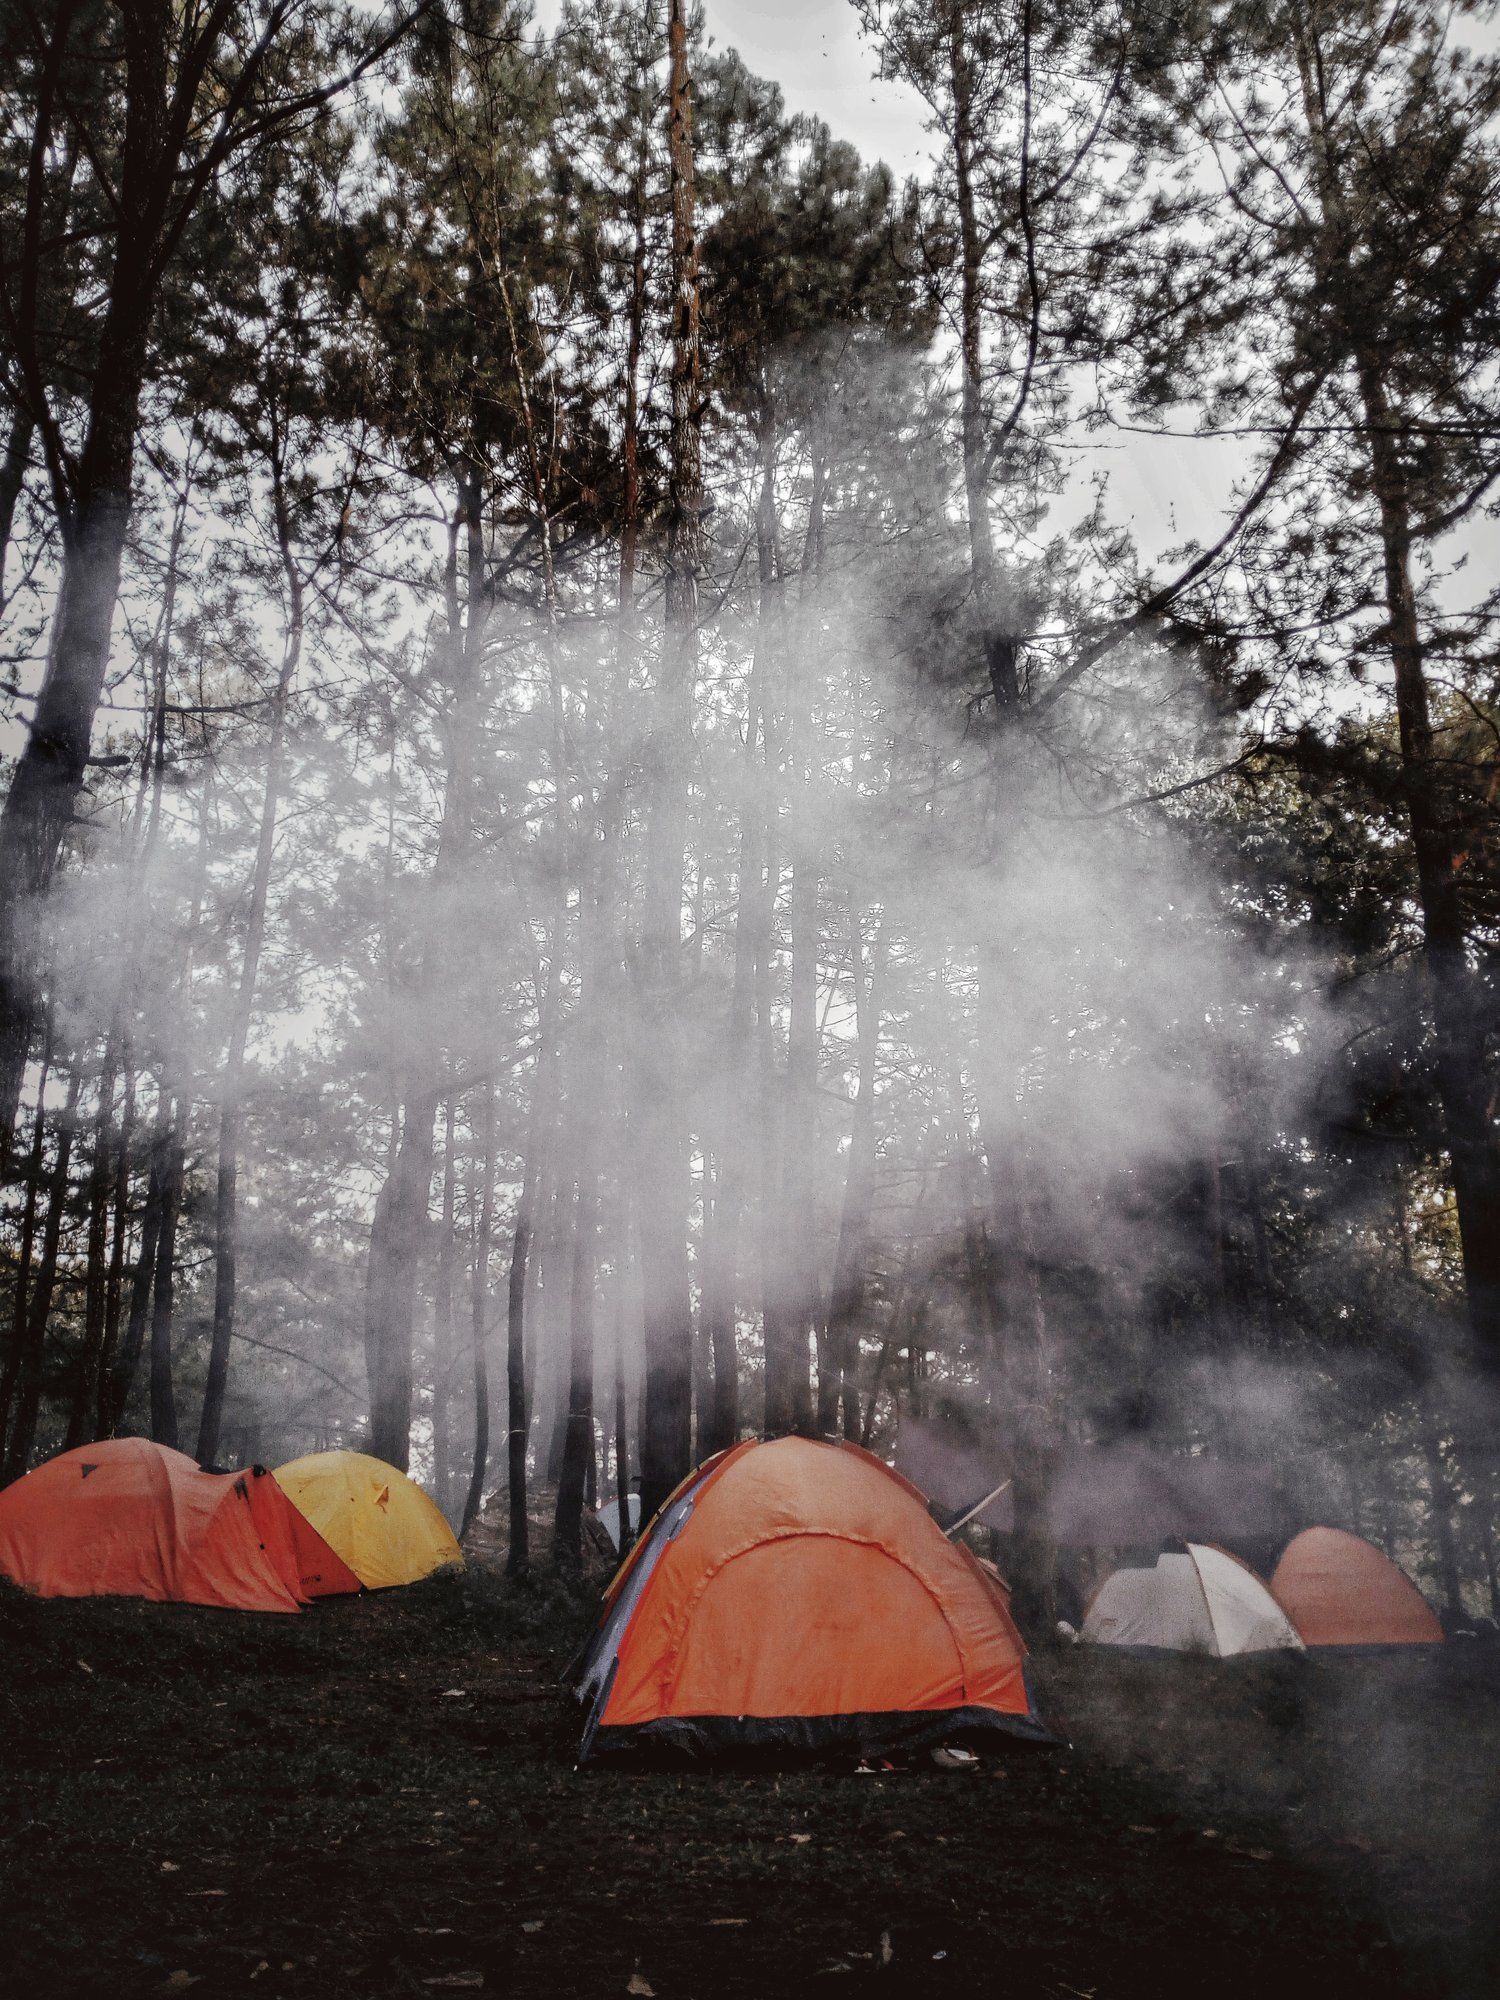 Tents in the forest with fog - Camping